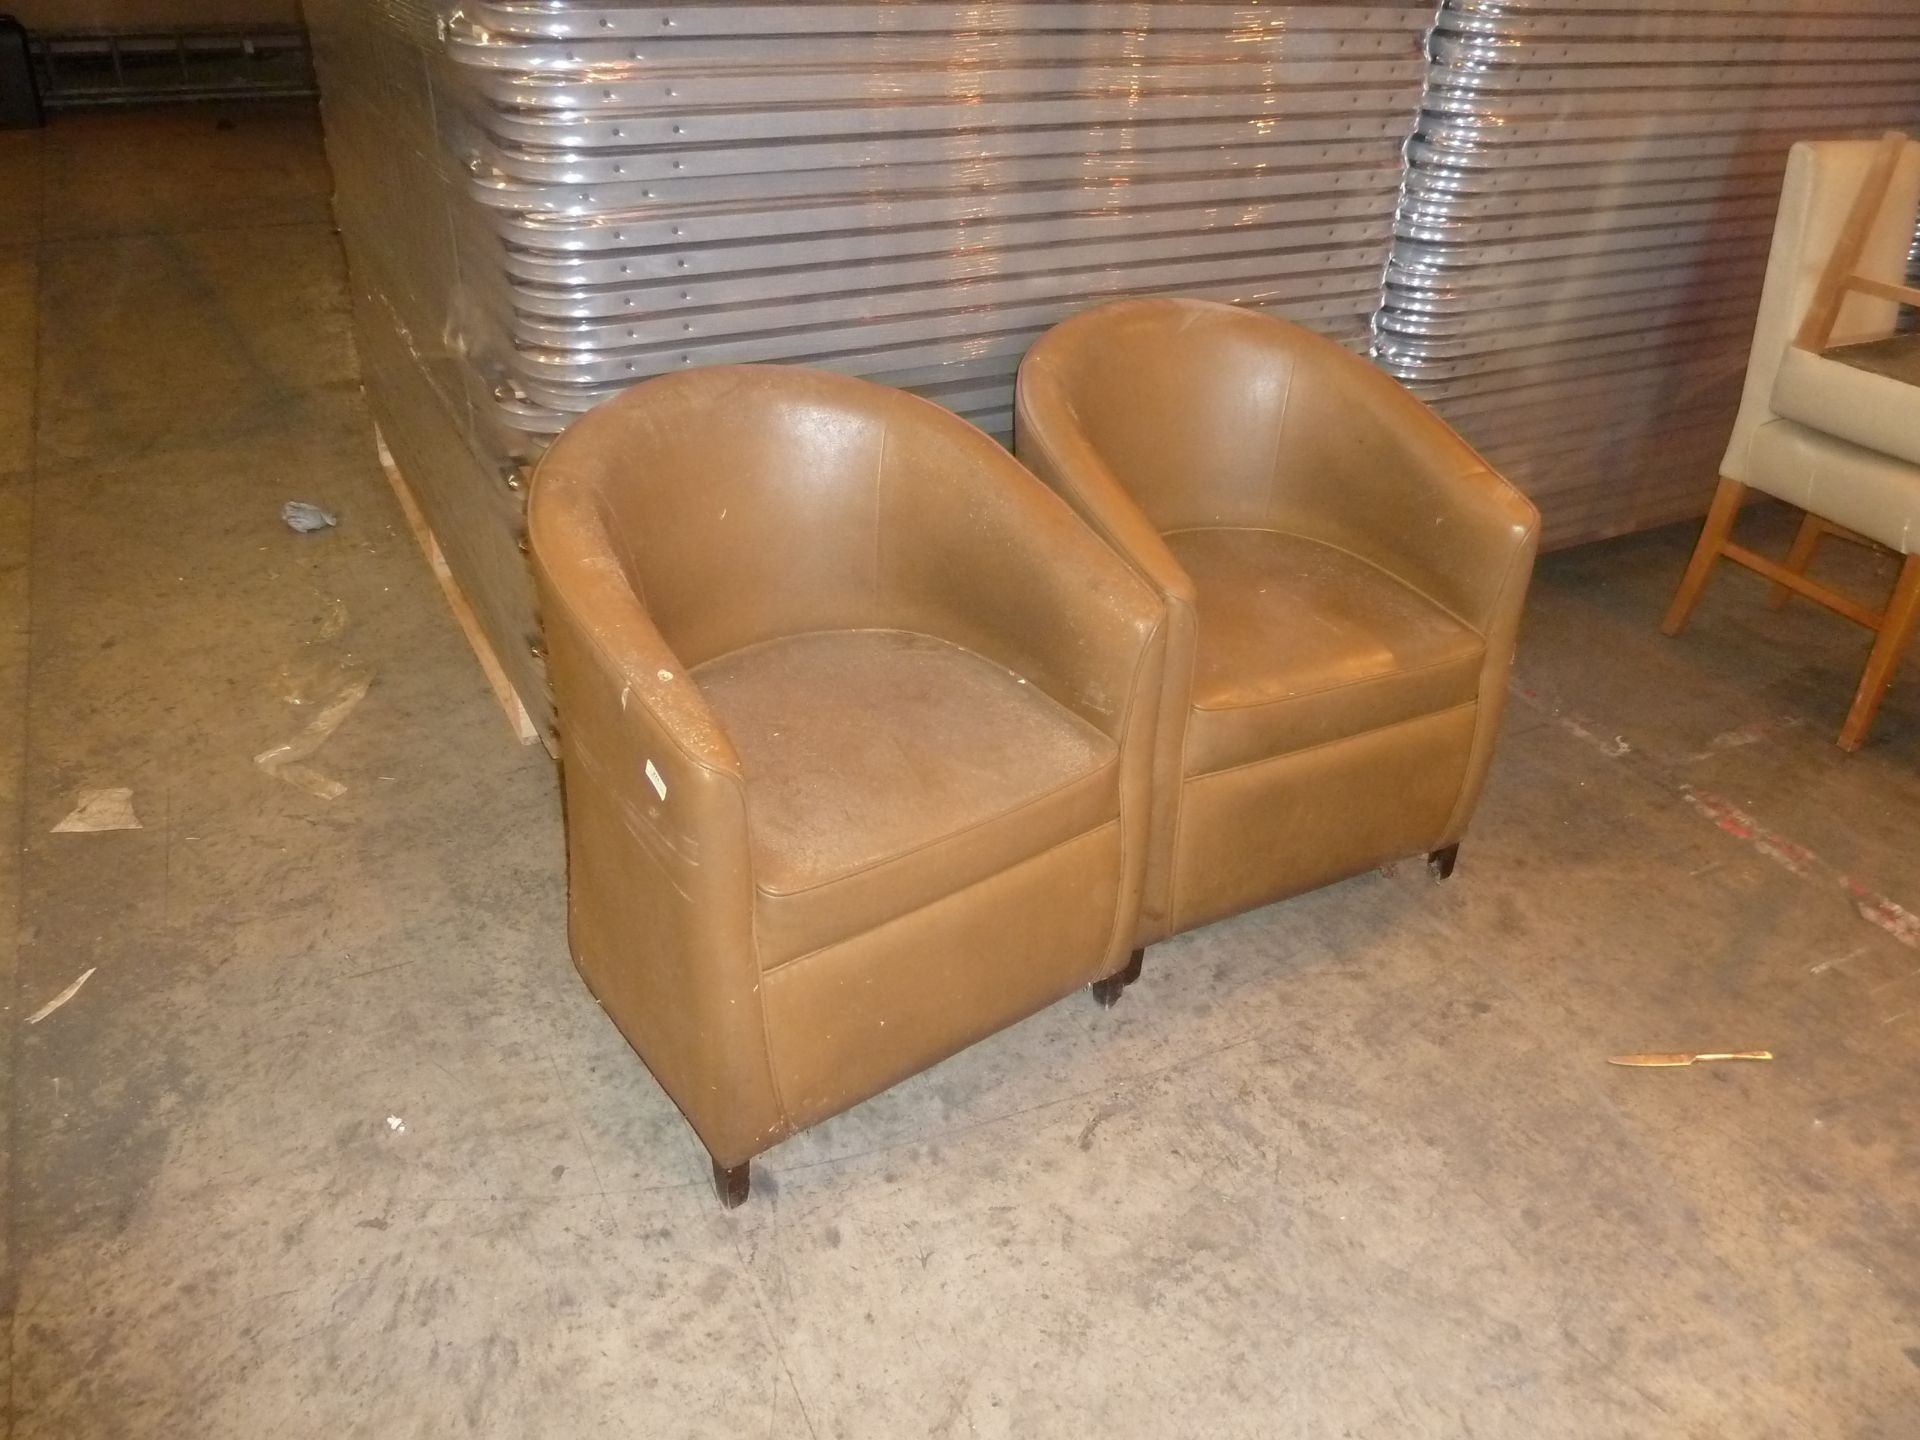 * 2 x brown arm chairs